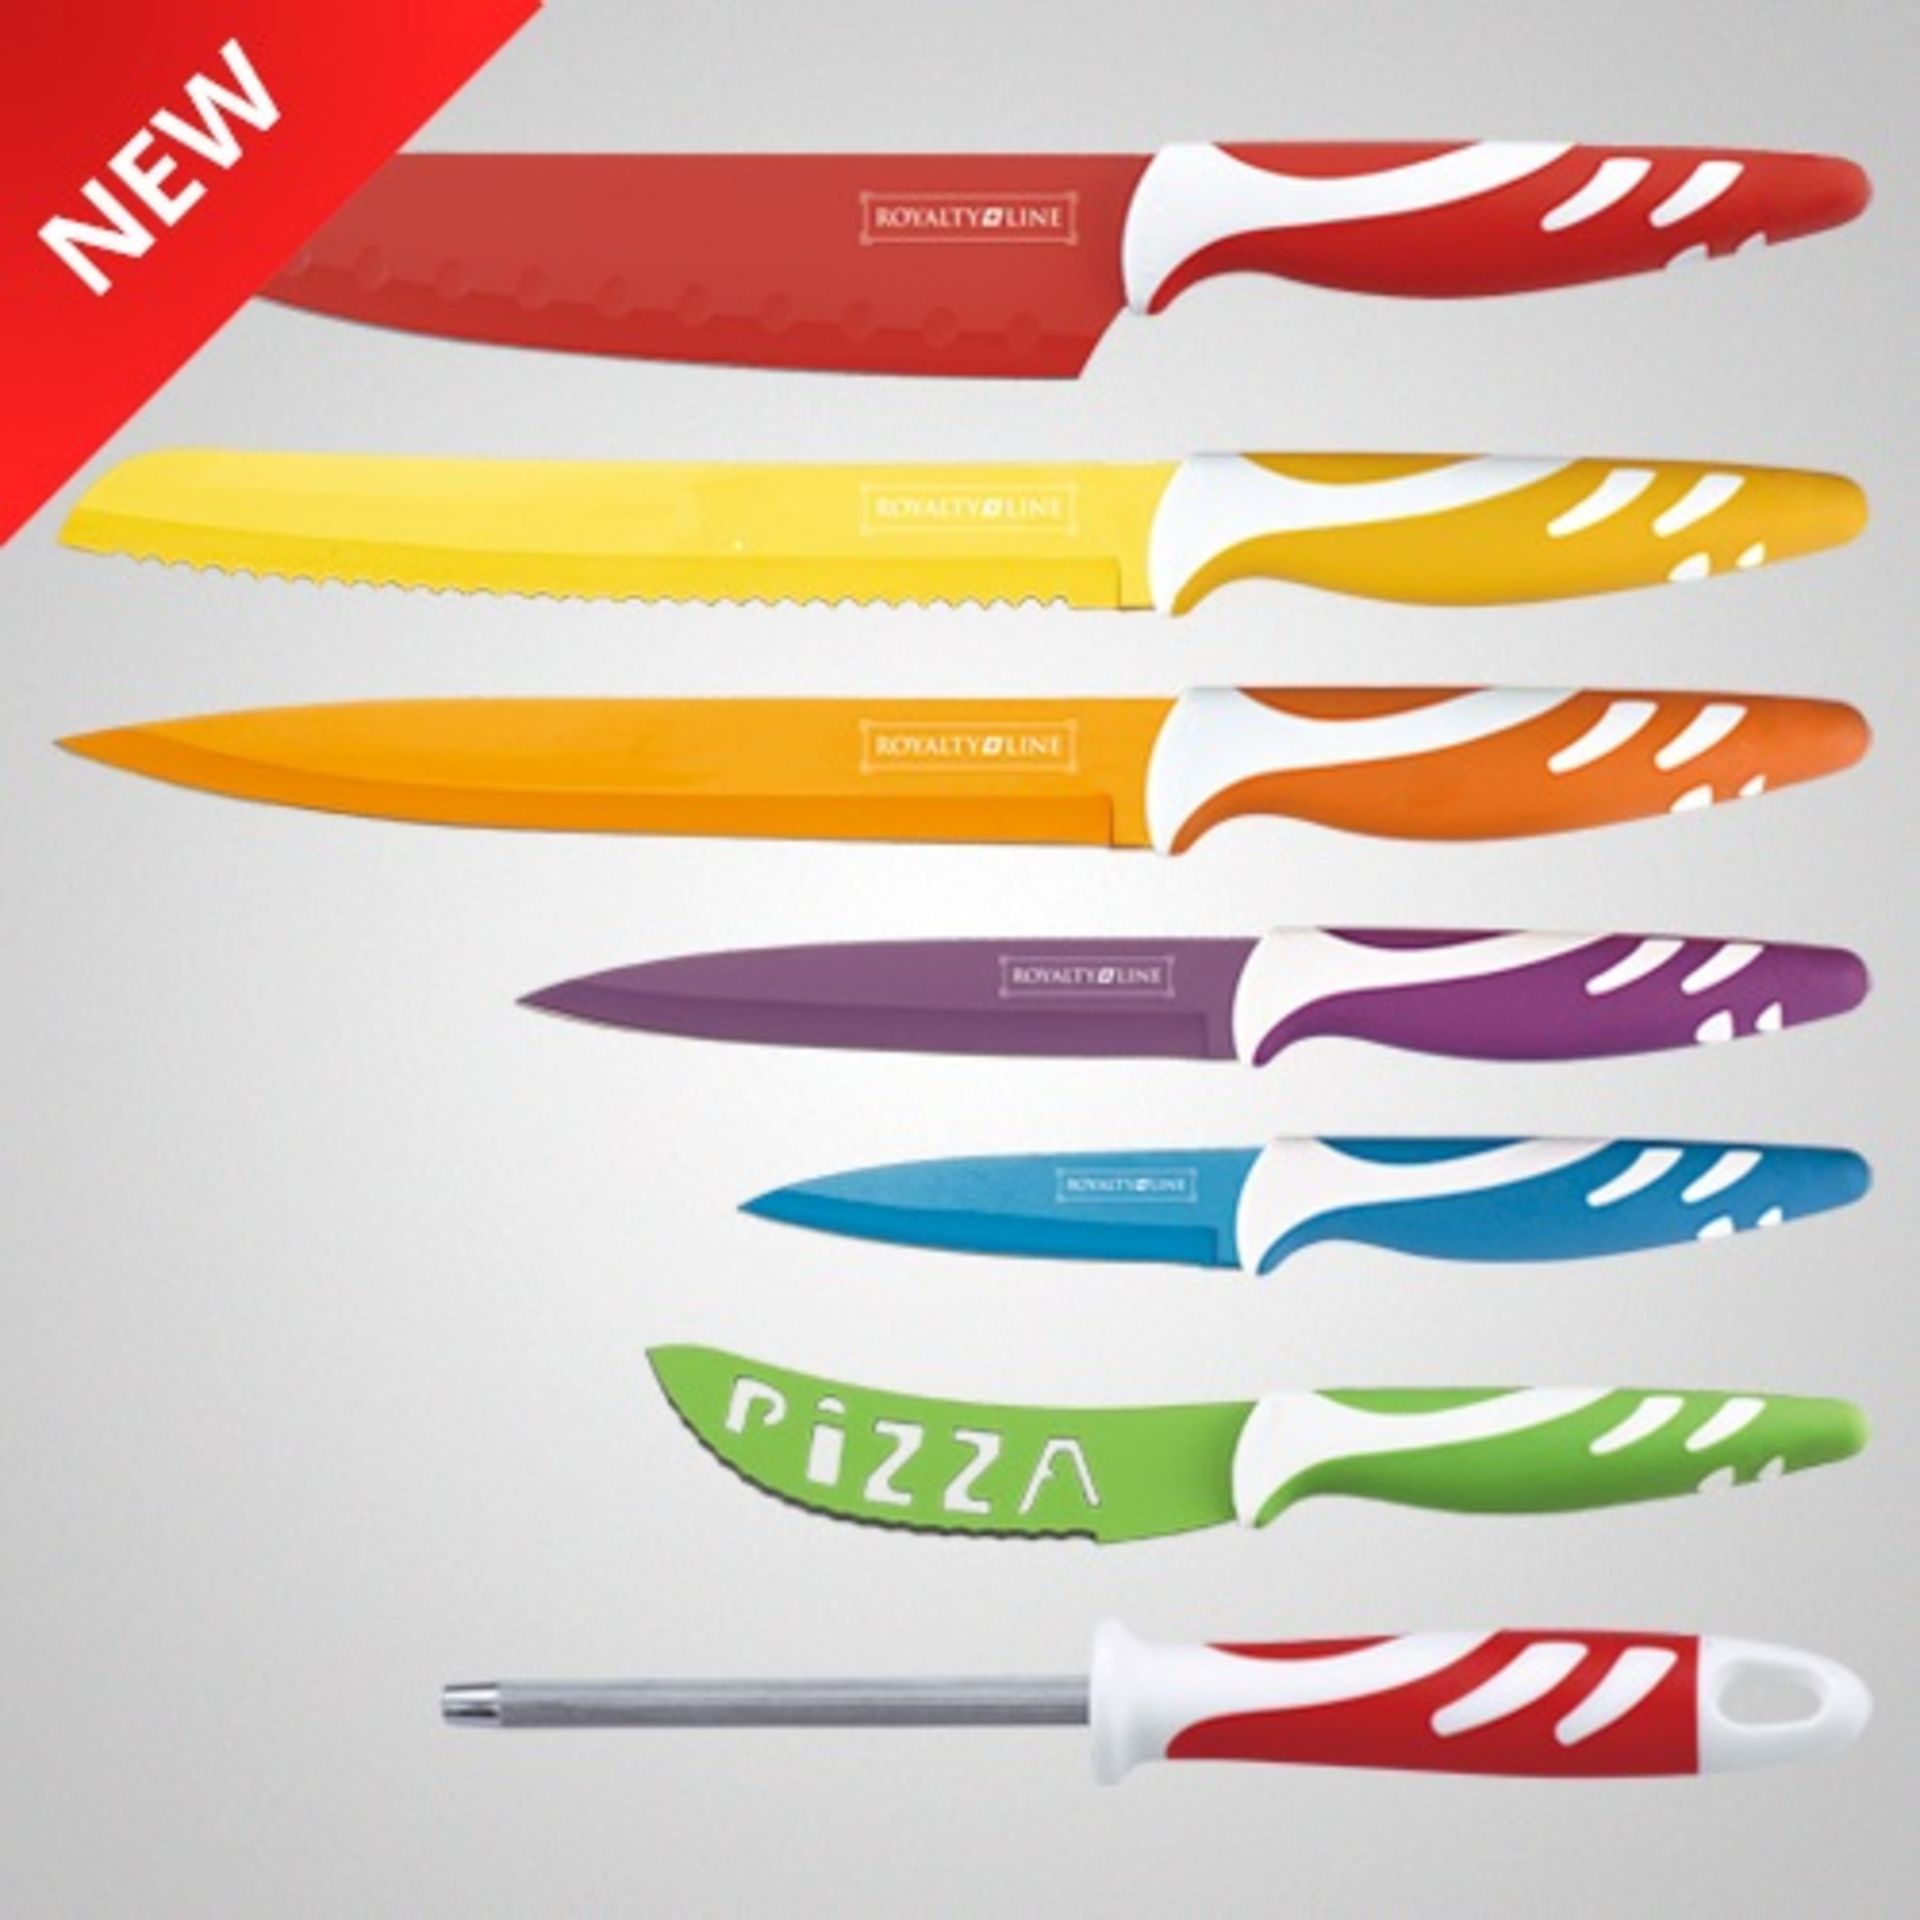 V *TRADE QTY* Brand New 7 Piece Non-Stick Multi Coloured Knife Set RRP99.00 Euros (Handle pattern - Image 2 of 3